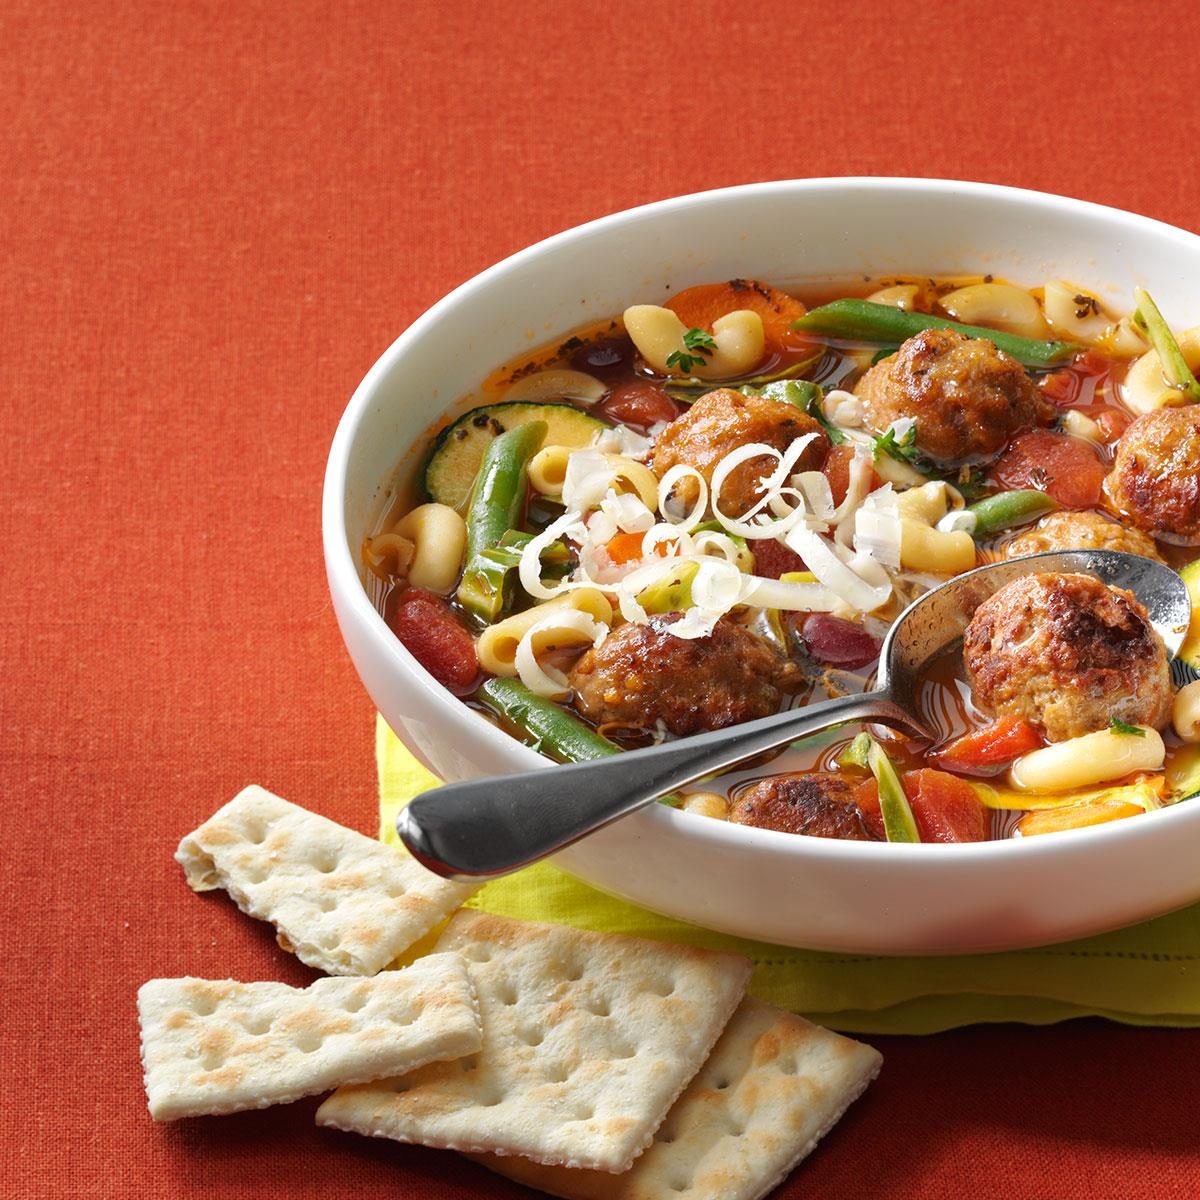 https://www.tasteofhome.com/wp-content/uploads/2018/01/Veggie-Soup-with-Meatballs_exps39056_RCCF143496B04_16_3bC_RMS-7.jpg